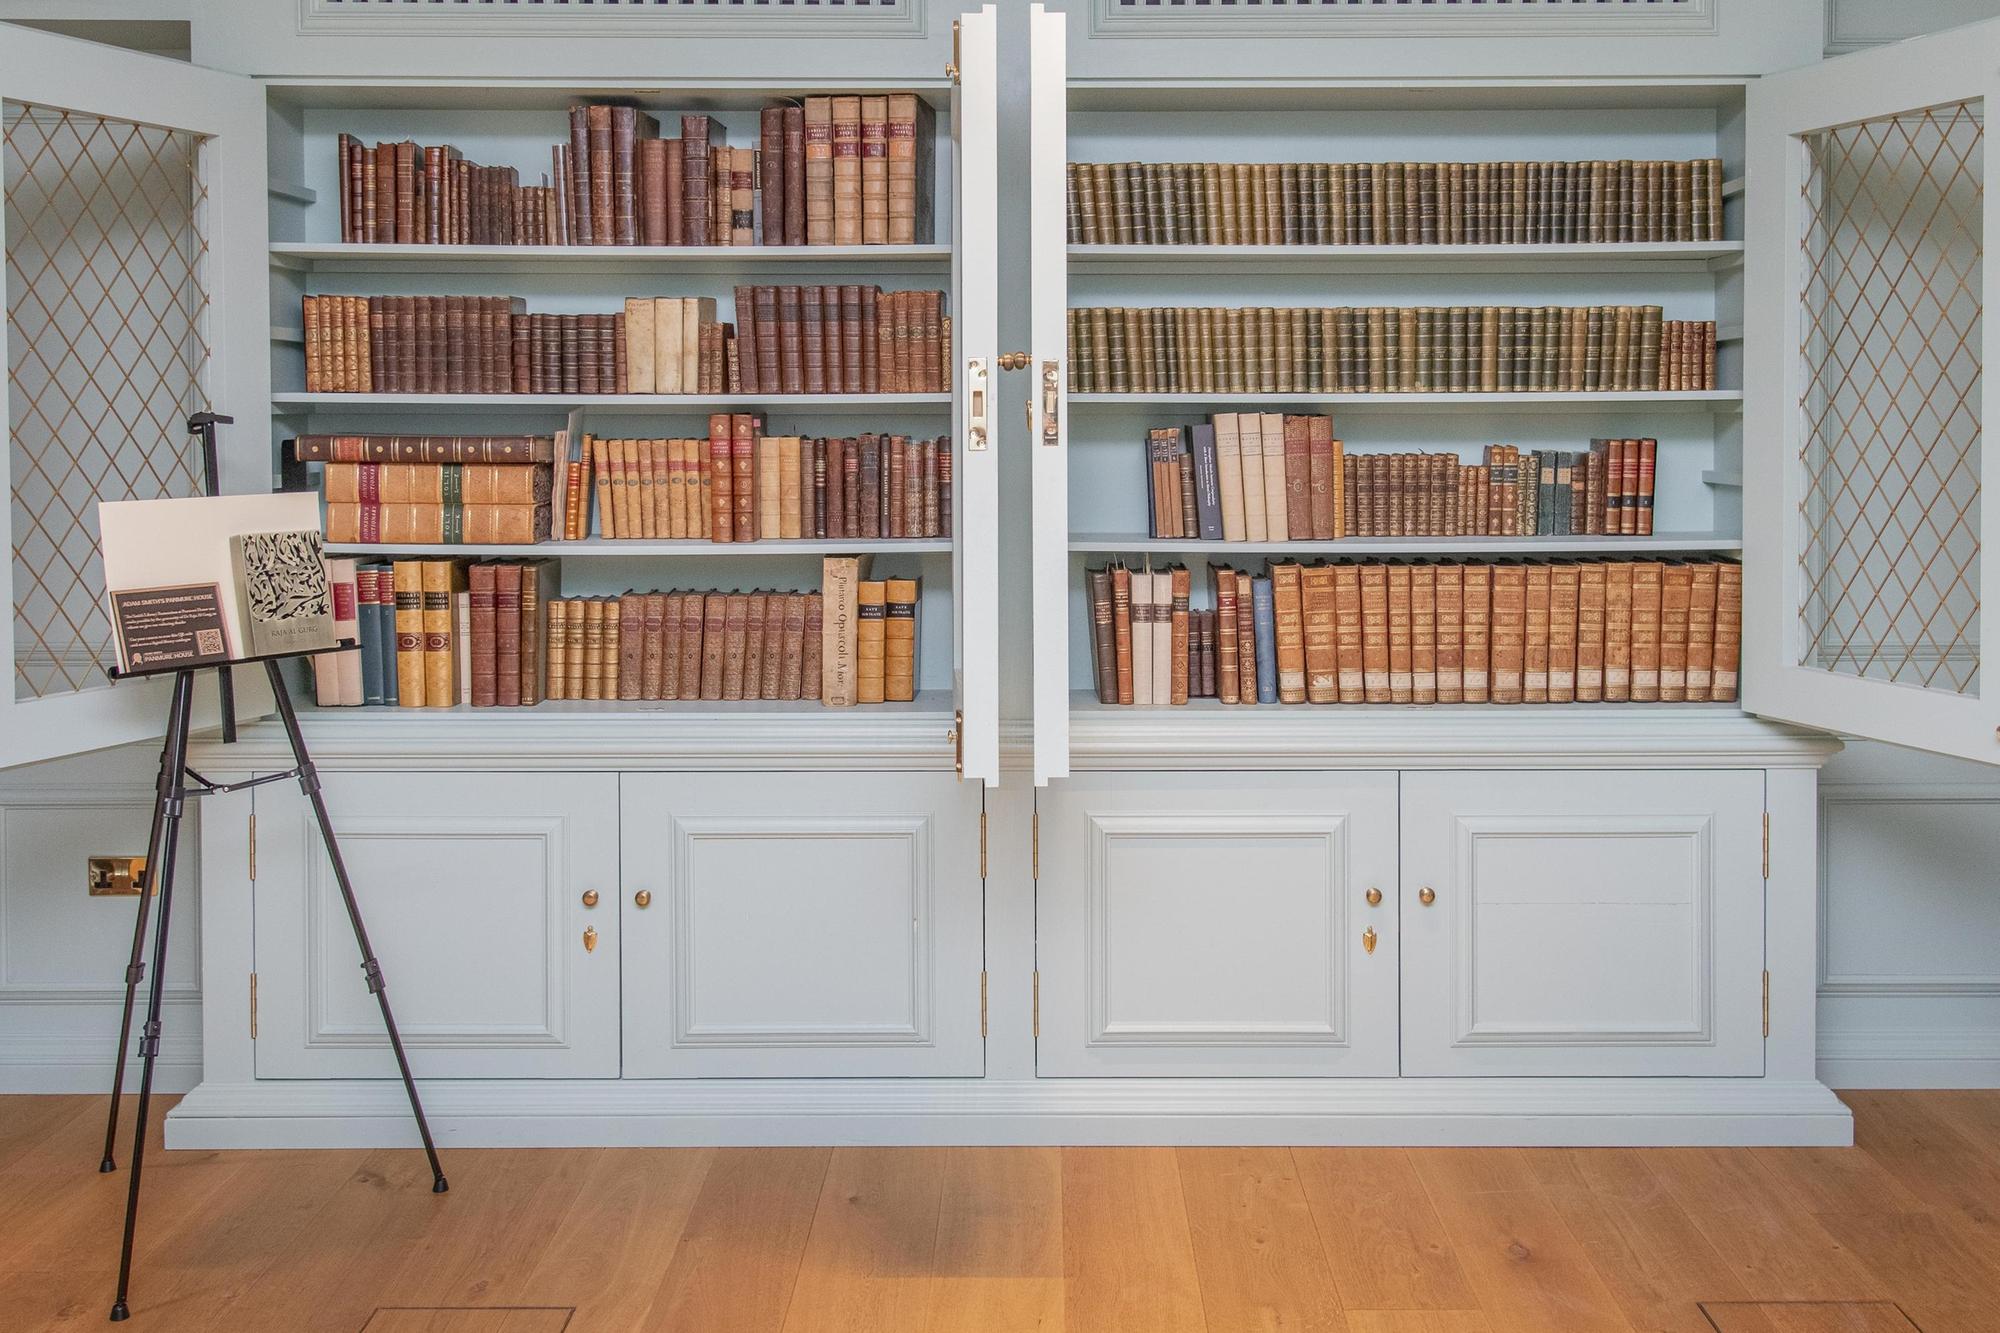 heriot-watt opens restored 18th century edinburgh library with collection of influential adam smith books